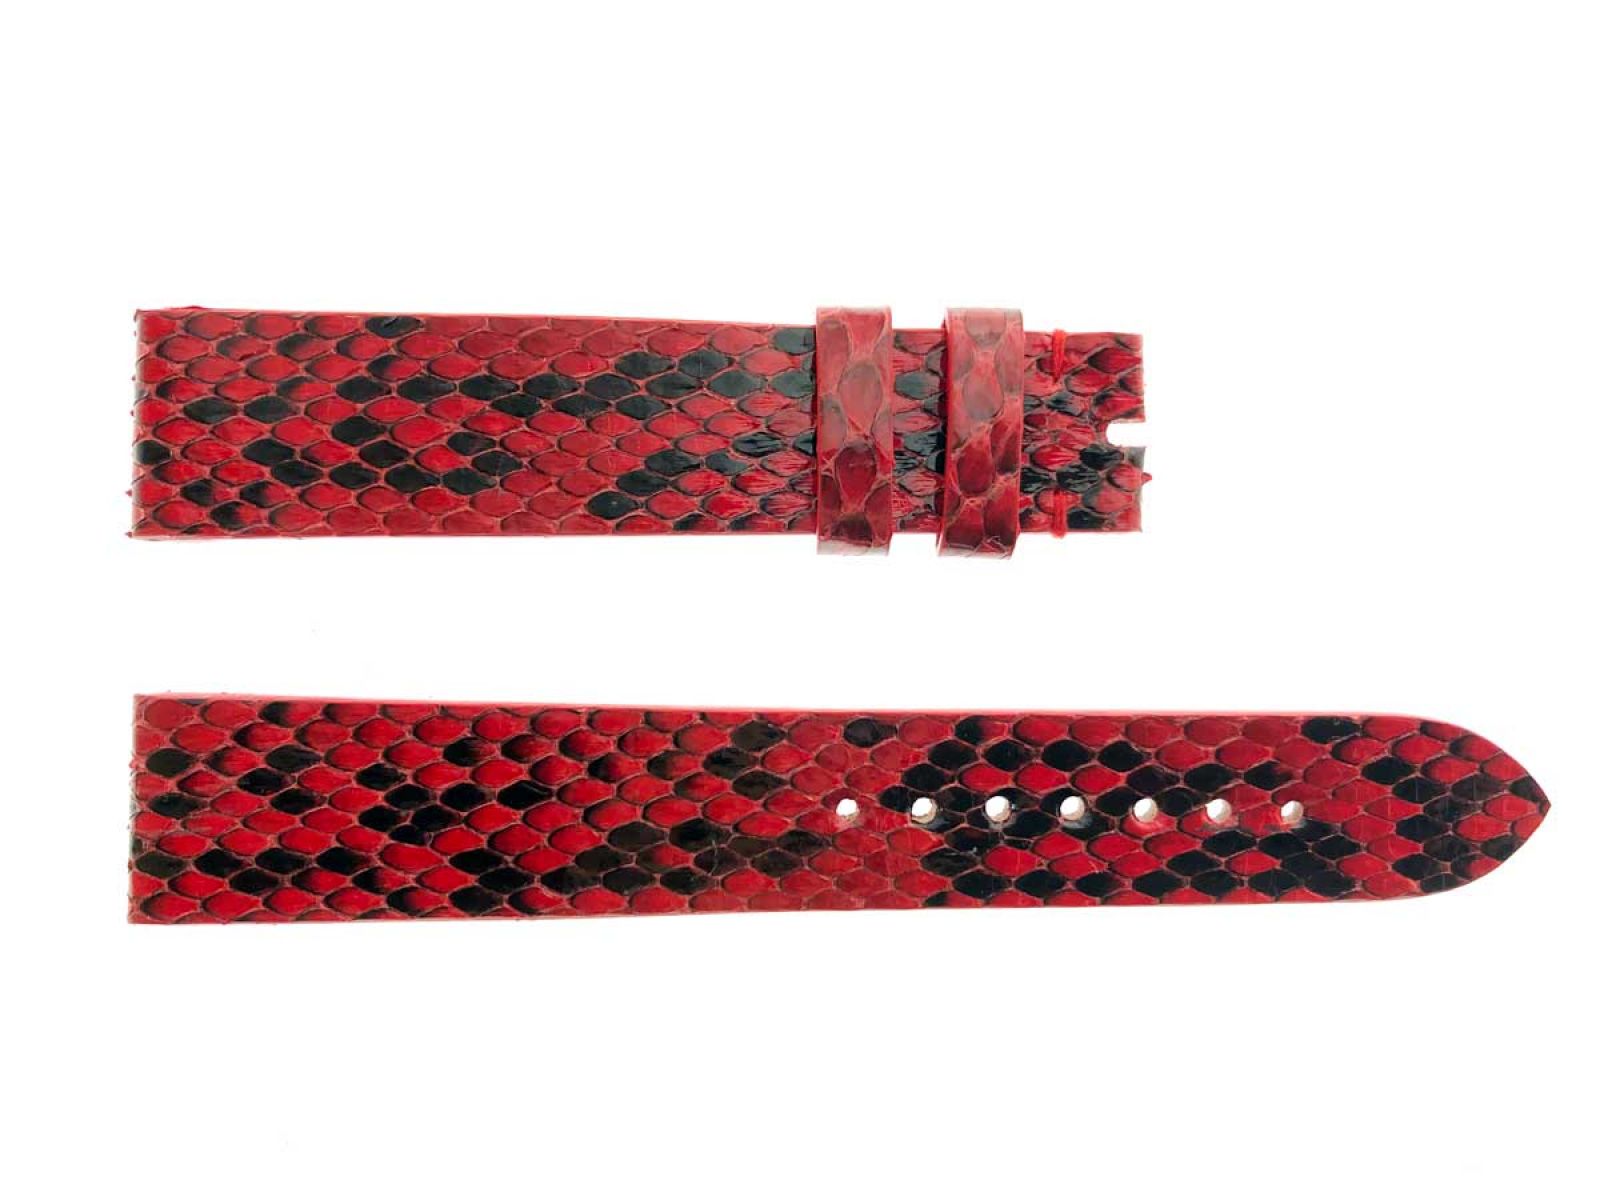 Red Gloss Python Leather Strap Classic style